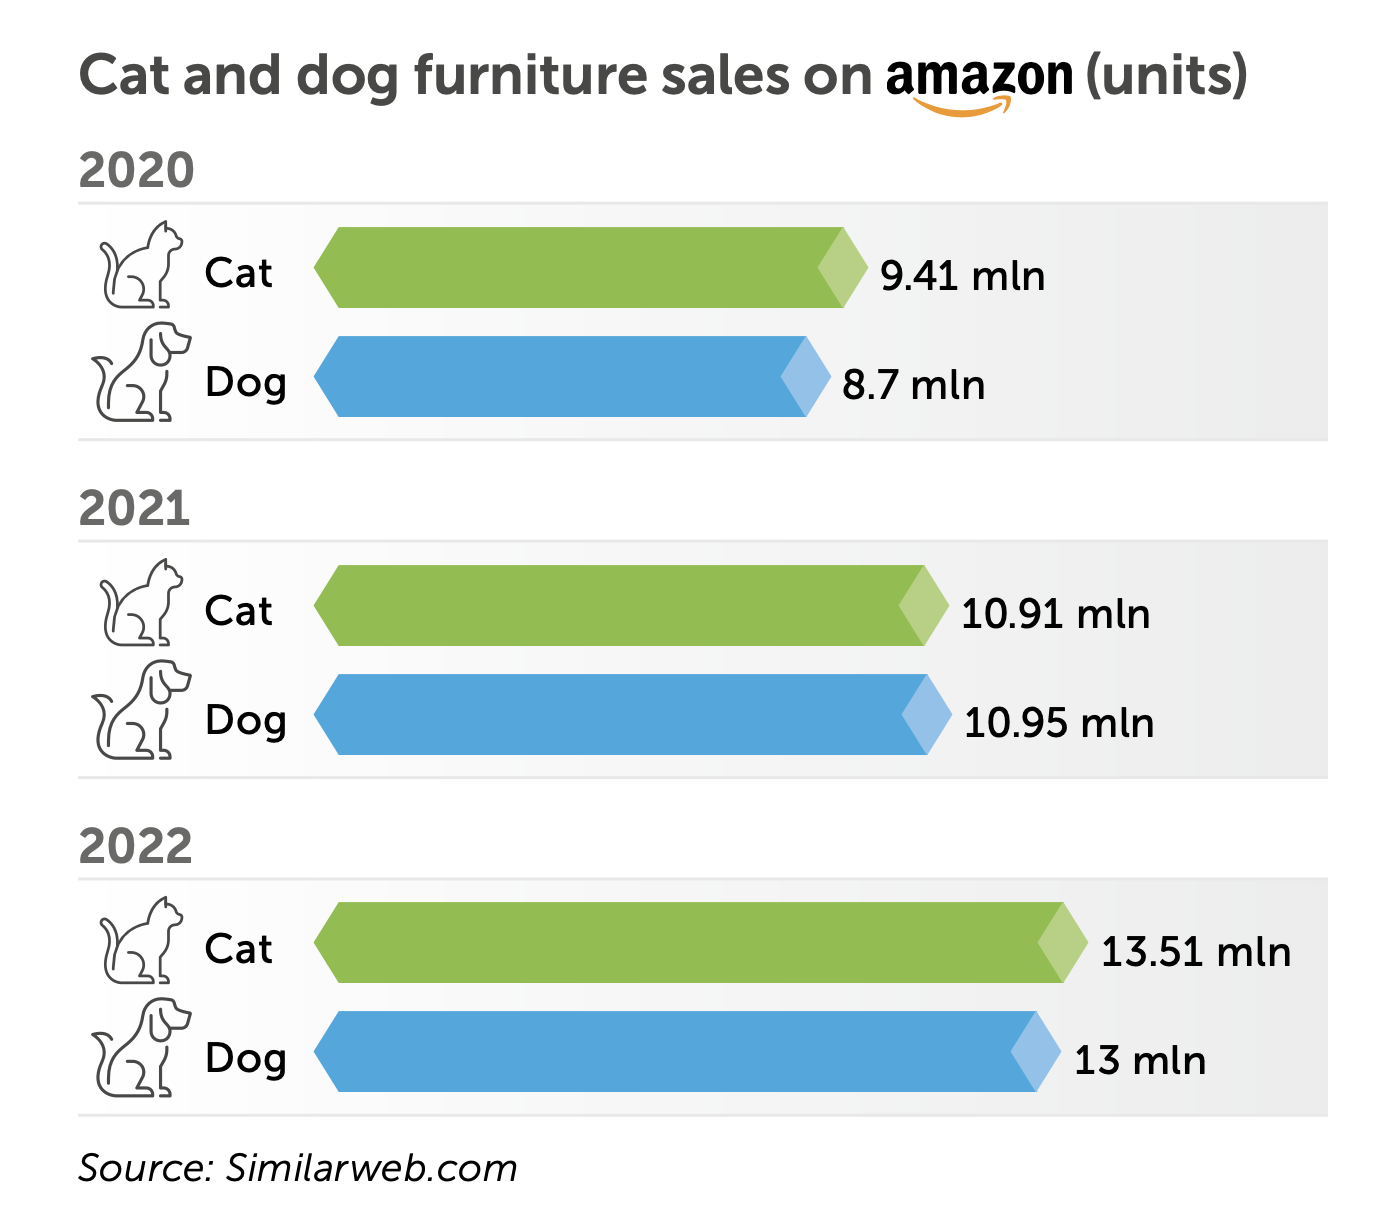 Cat and dog furniture sales on amazon - a stat